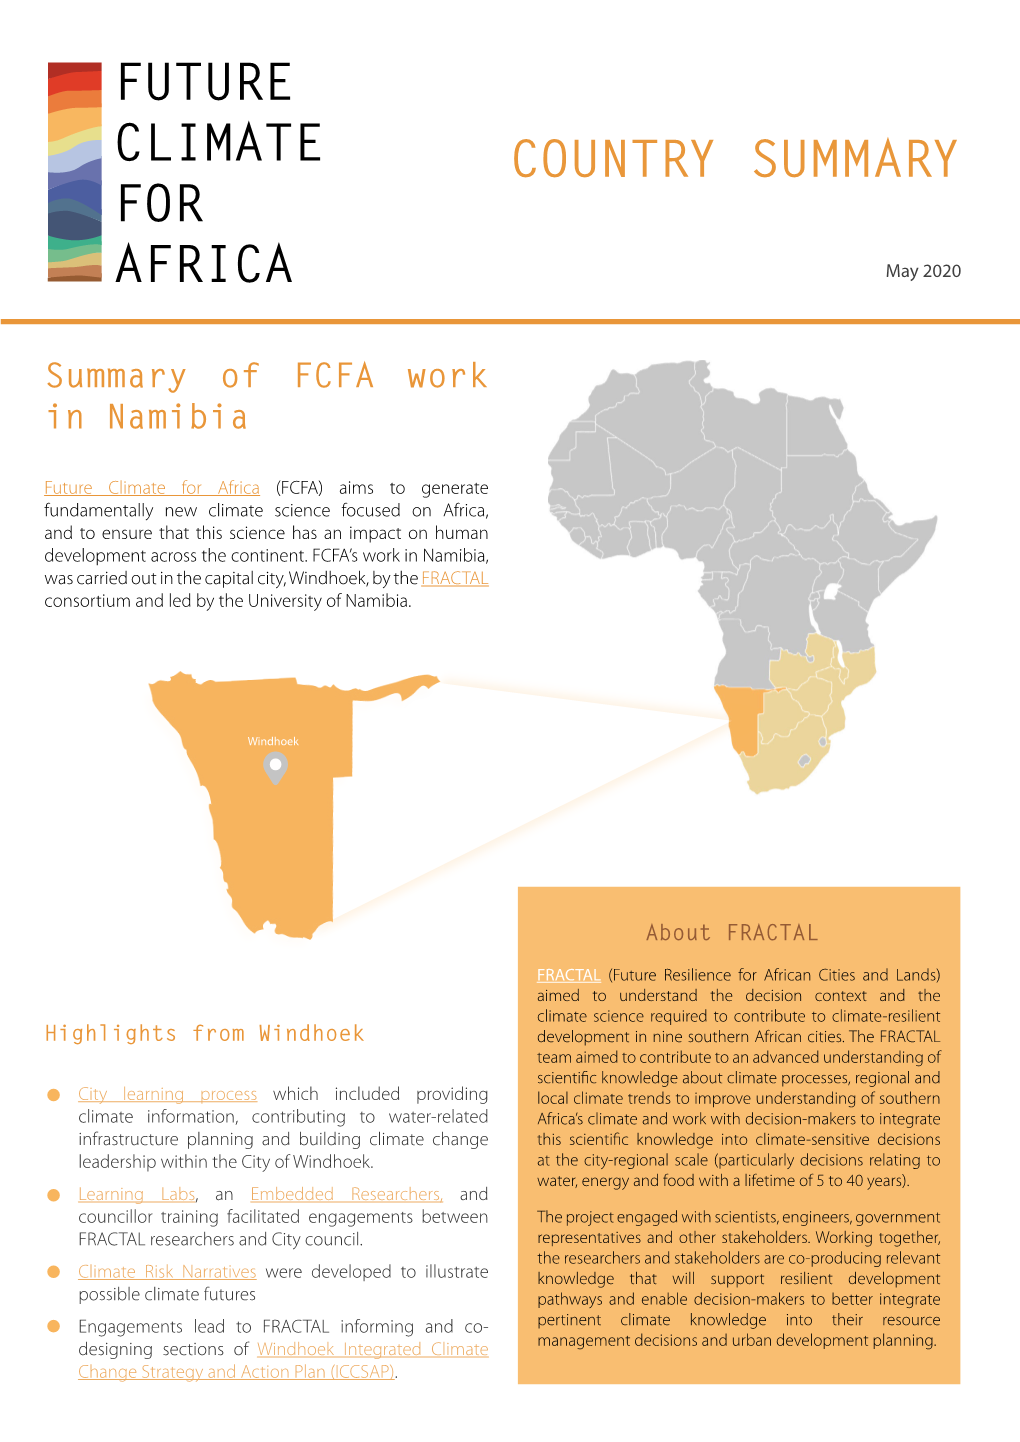 COUNTRY SUMMARY for AFRICA May 2020